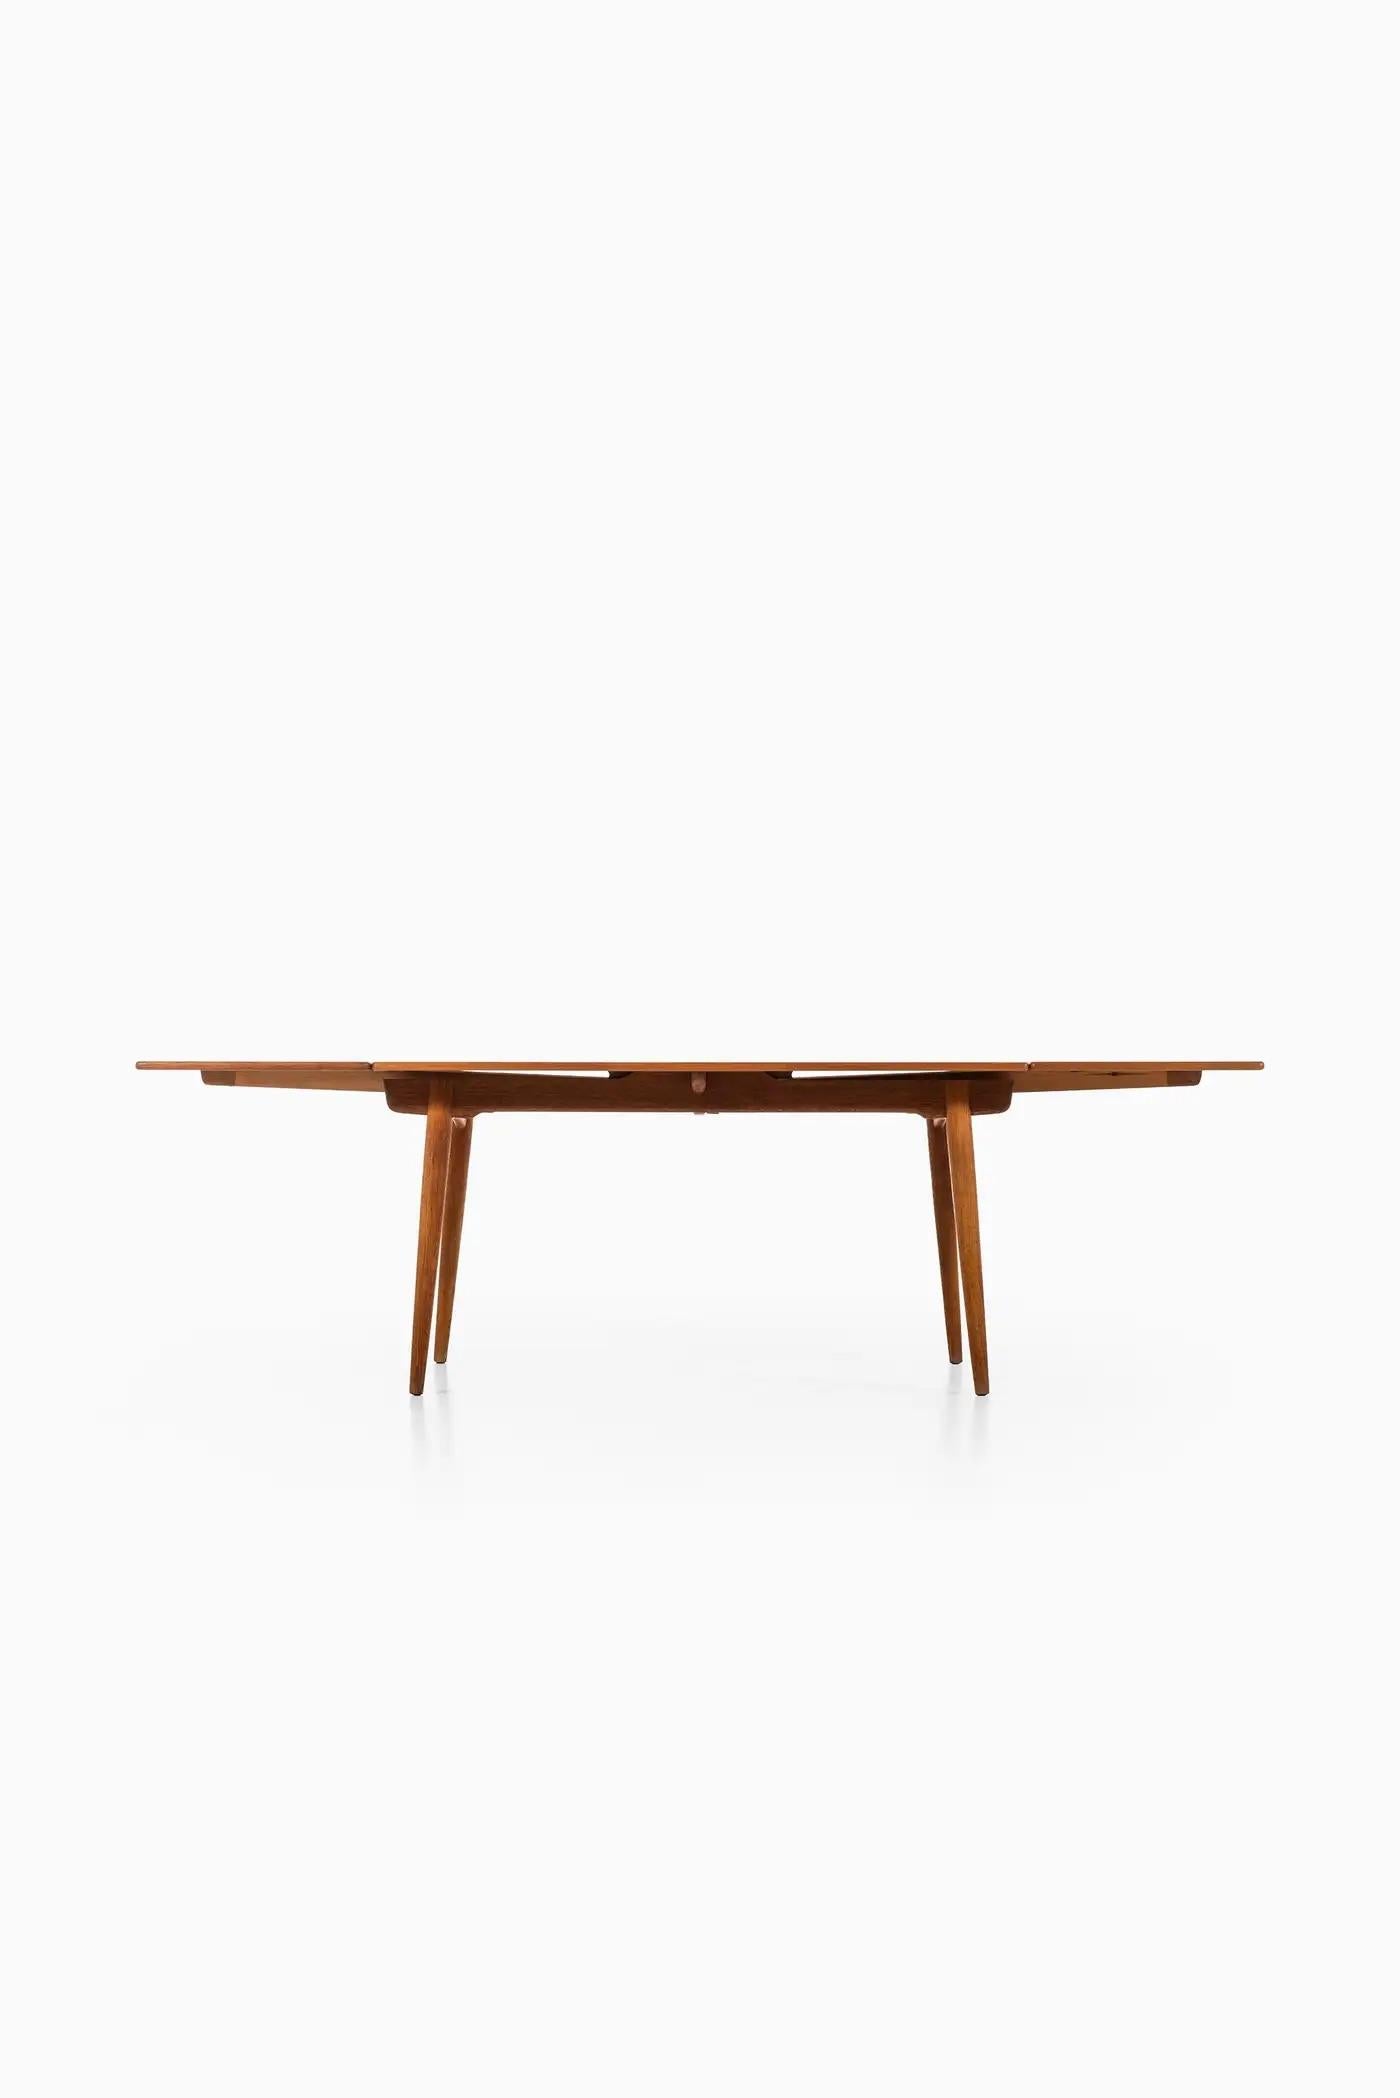 Created by Hans Wegner, recognized as one of the leading designers of the Danish mid-century modern movement, this table is the epitome of functional modernity. The 